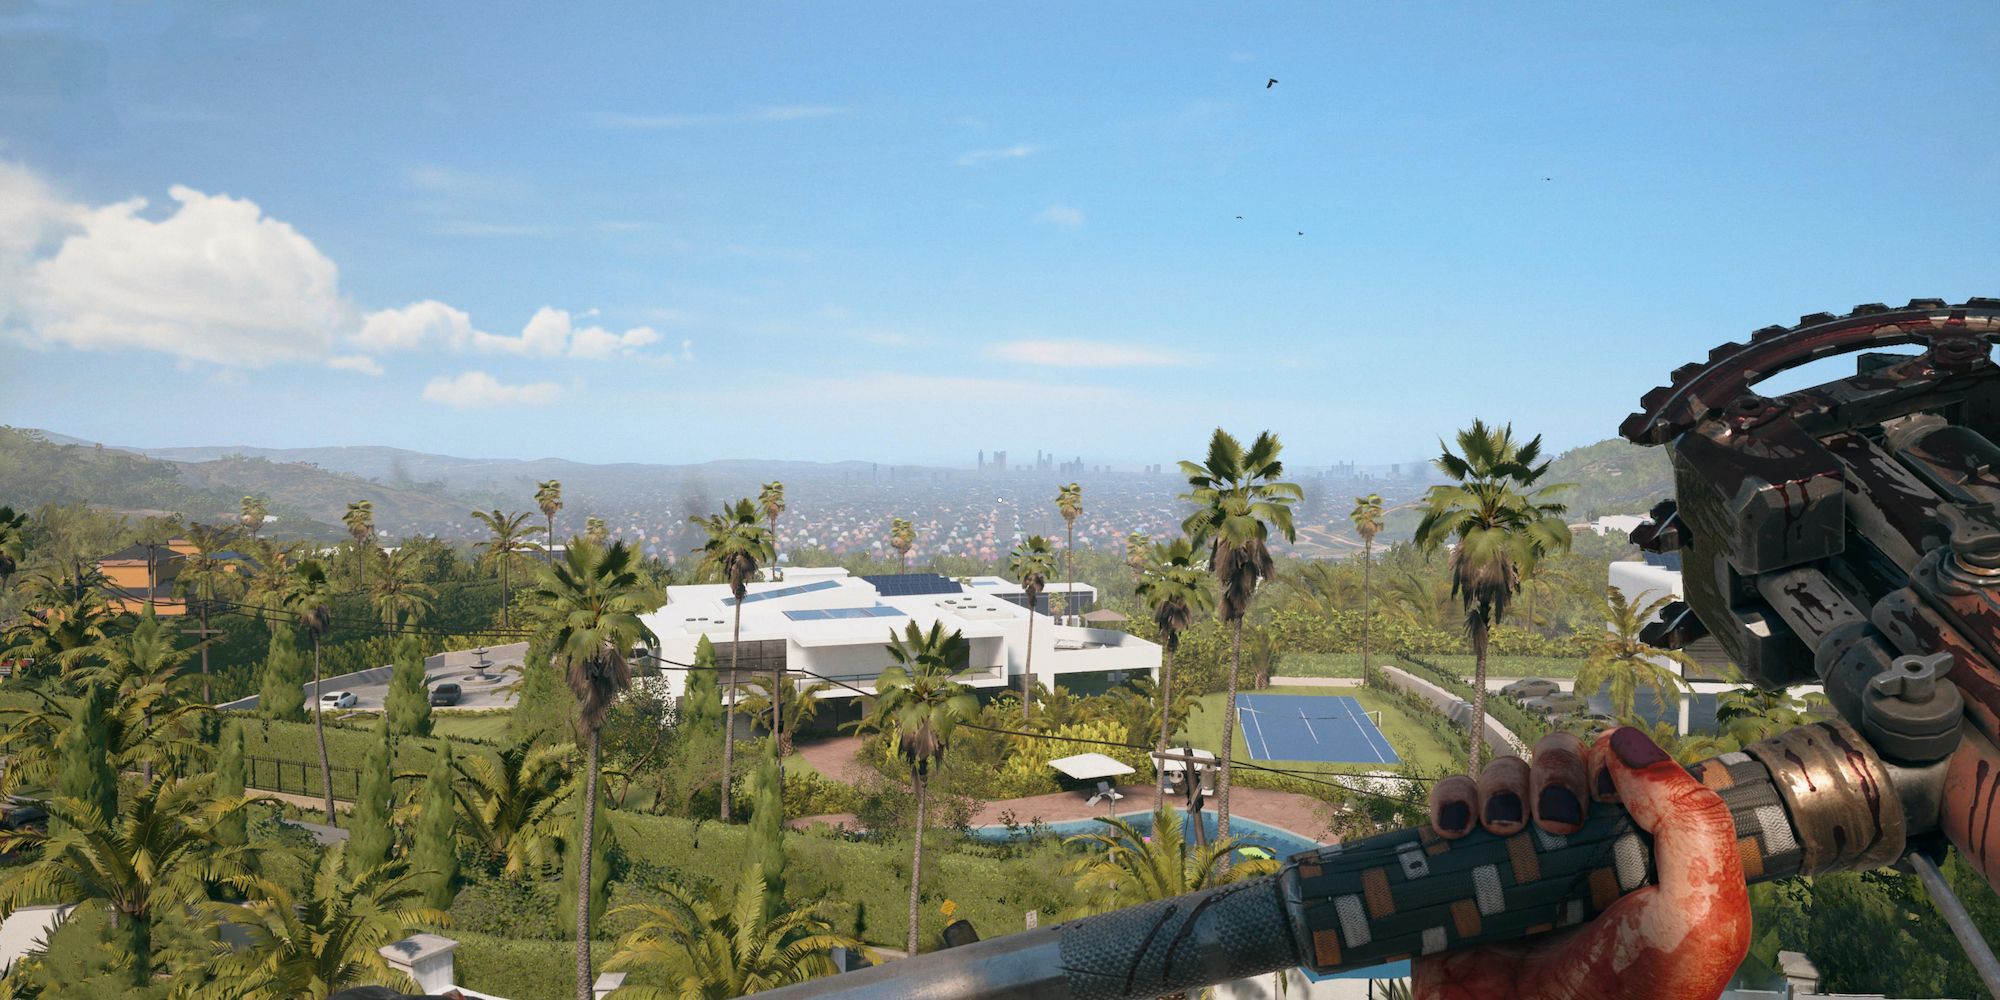 A view of downtown Los Angeles from the top of the Bel-Air building in Dead Island 2.